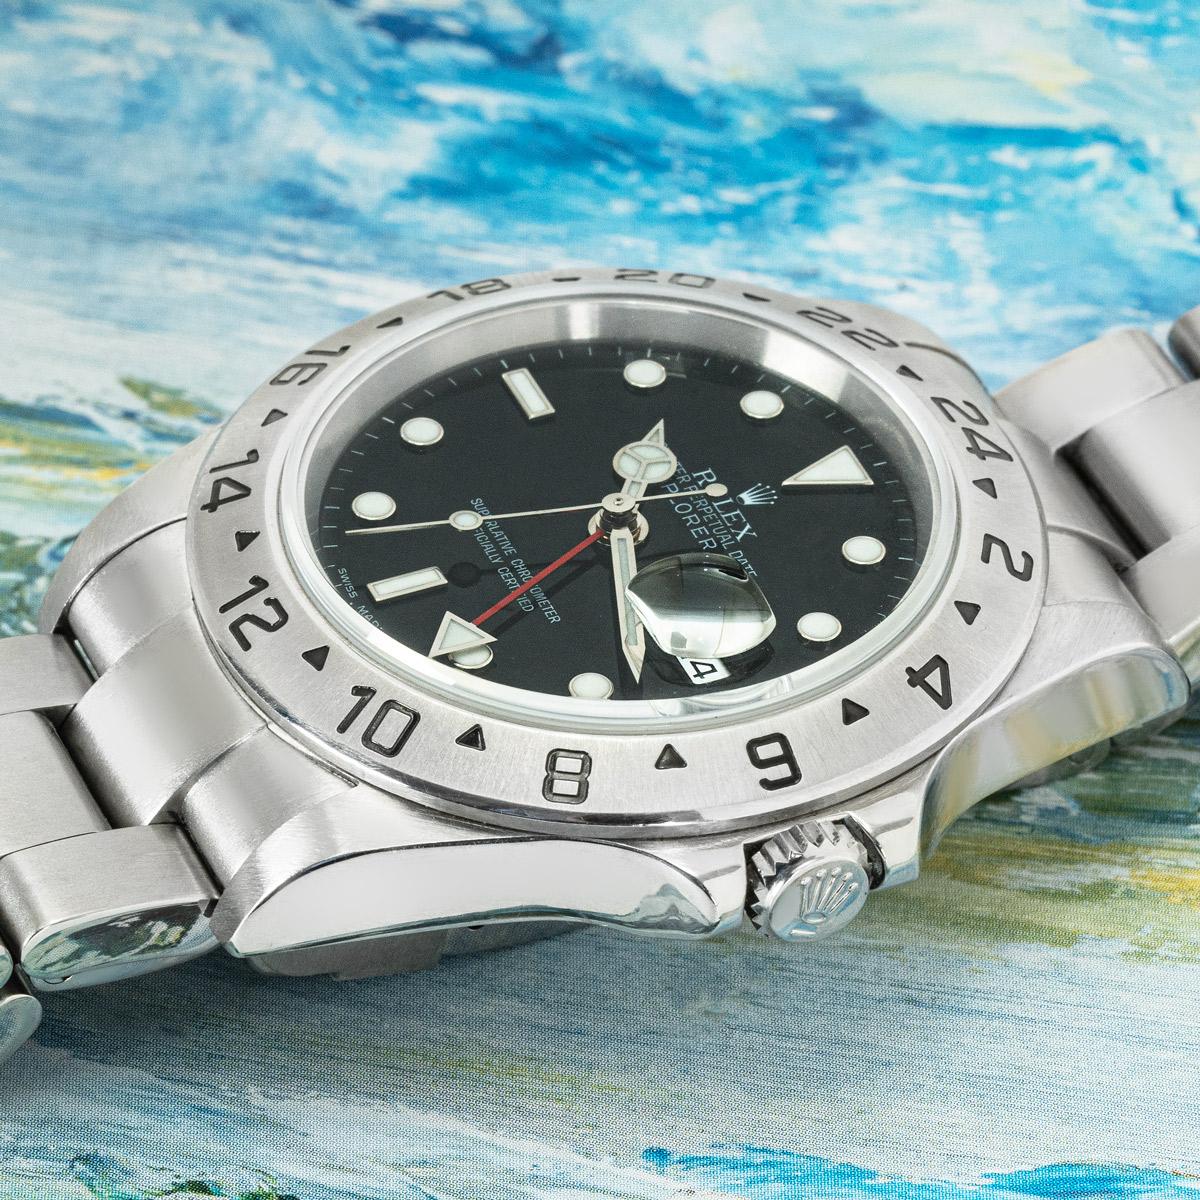 A 40mm Explorer II by Rolex in stainless steel. Features a black dial with a date aperture, a red 24-hour hand and a stainless steel fixed bezel set with a 24-hour display. Fitted with a sapphire glass, a self-winding automatic movement and a steel